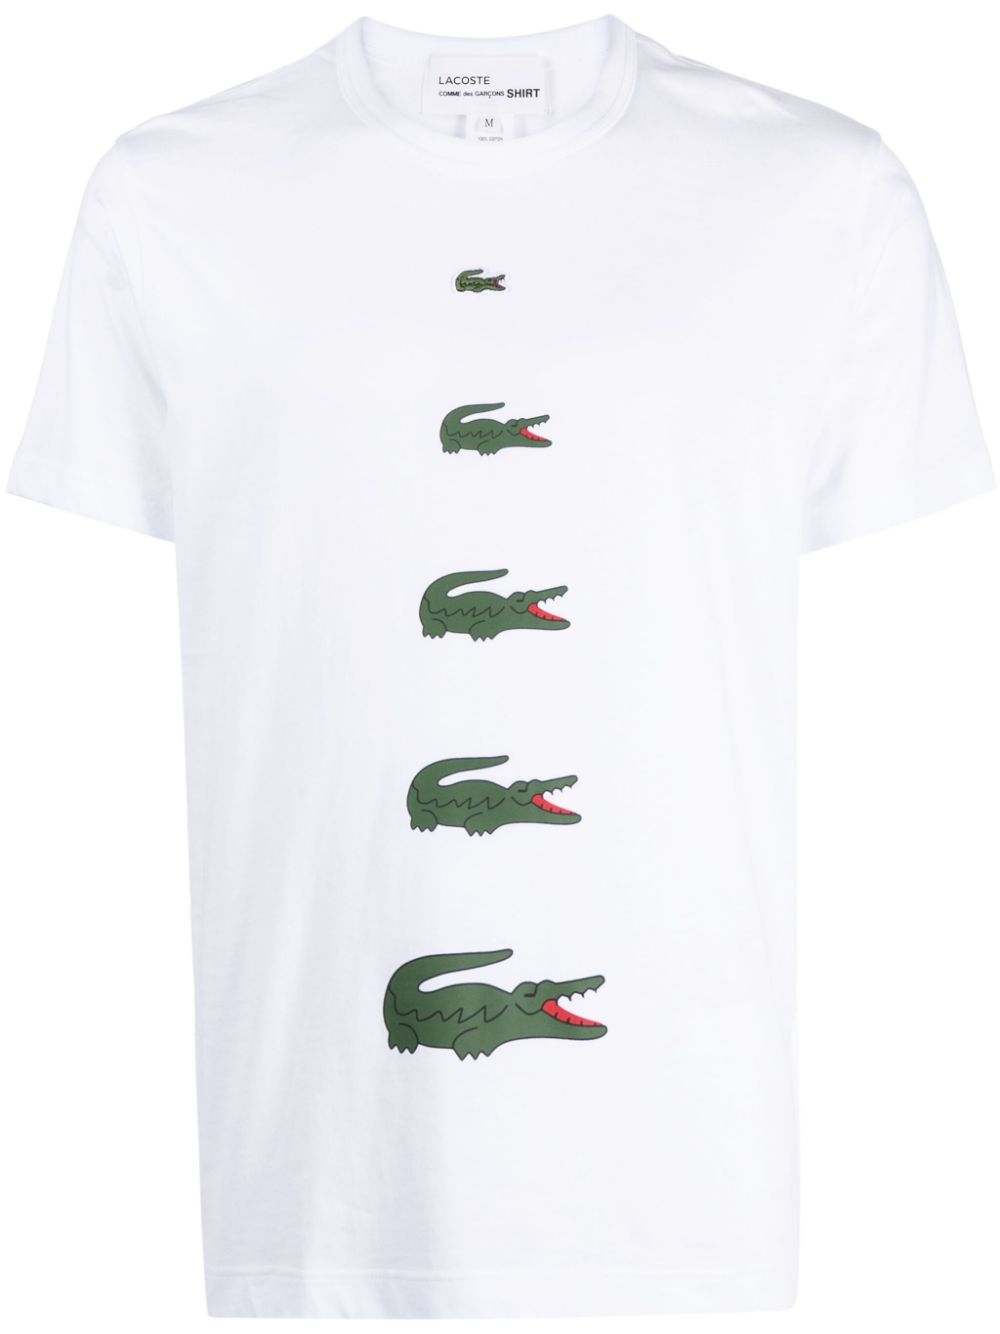 white t-shirt for Lacoste